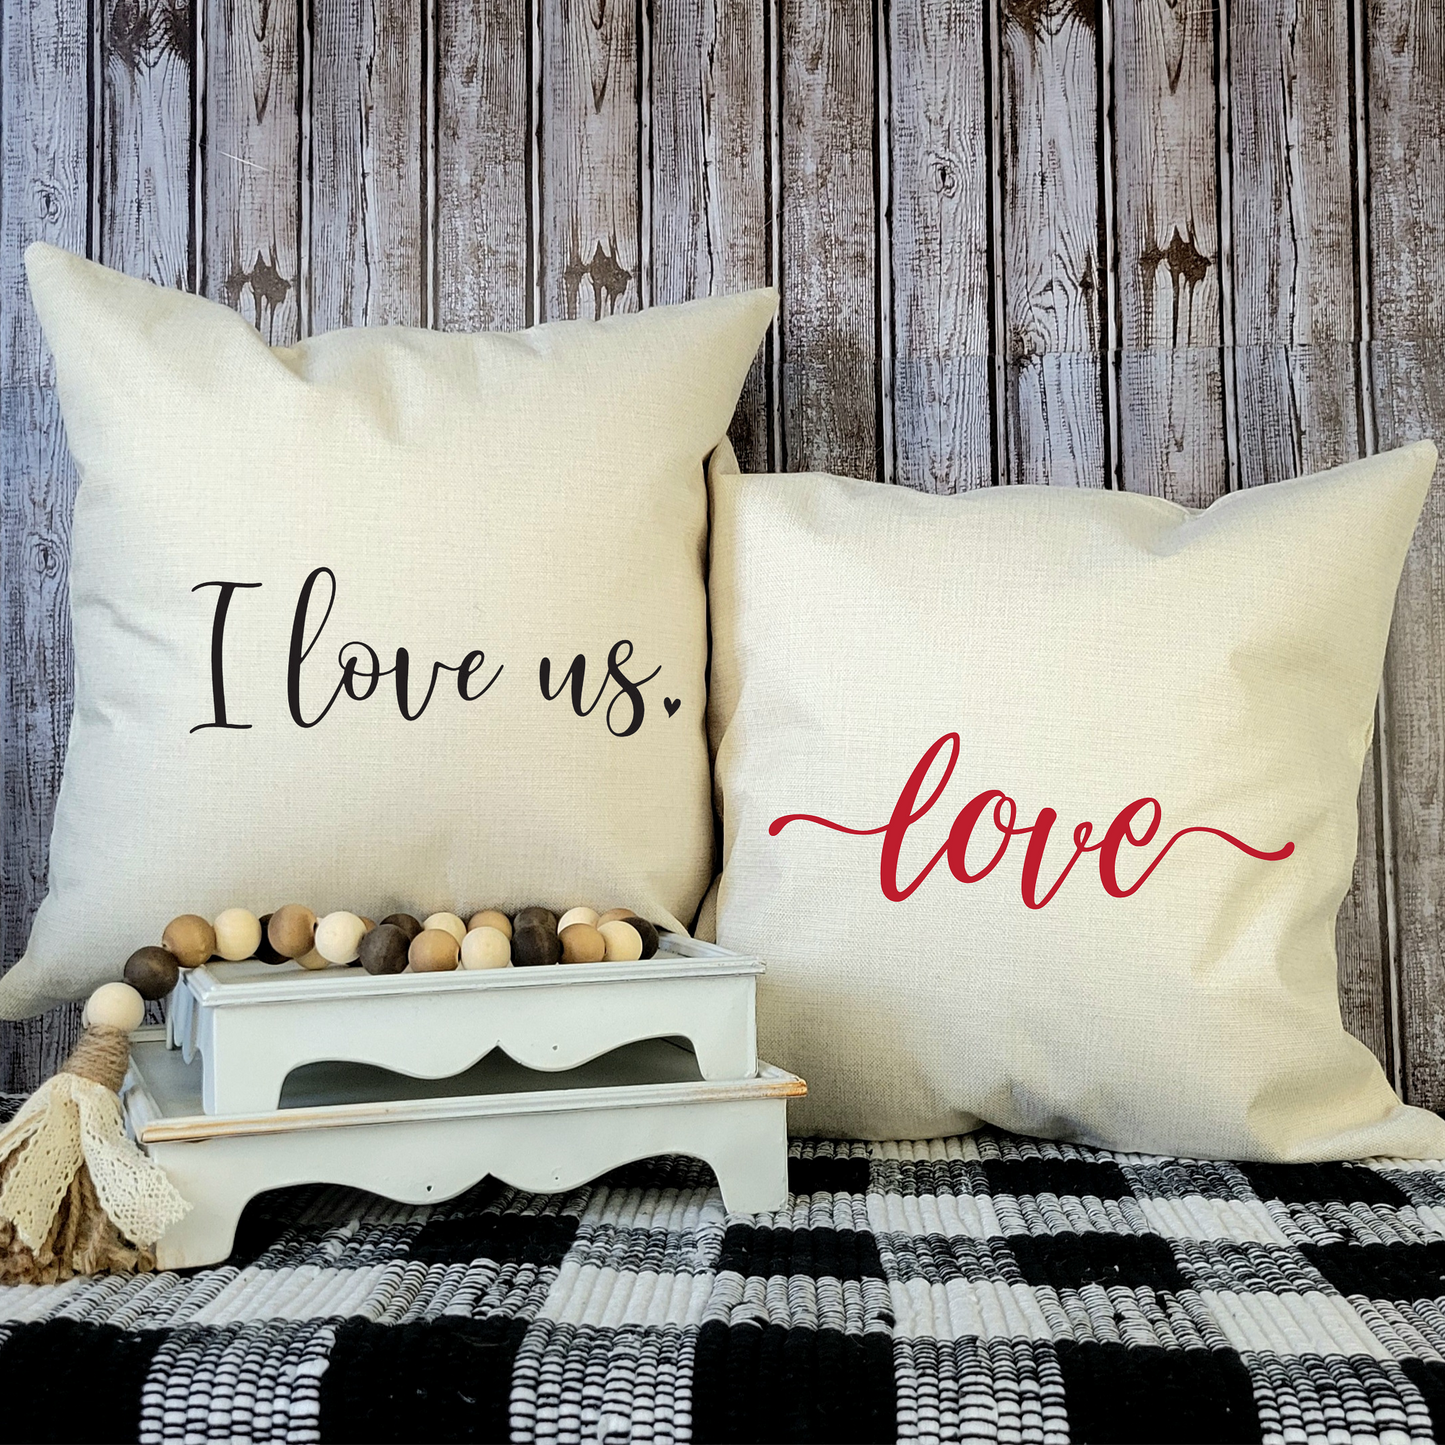 I Love Us Pillow Cover